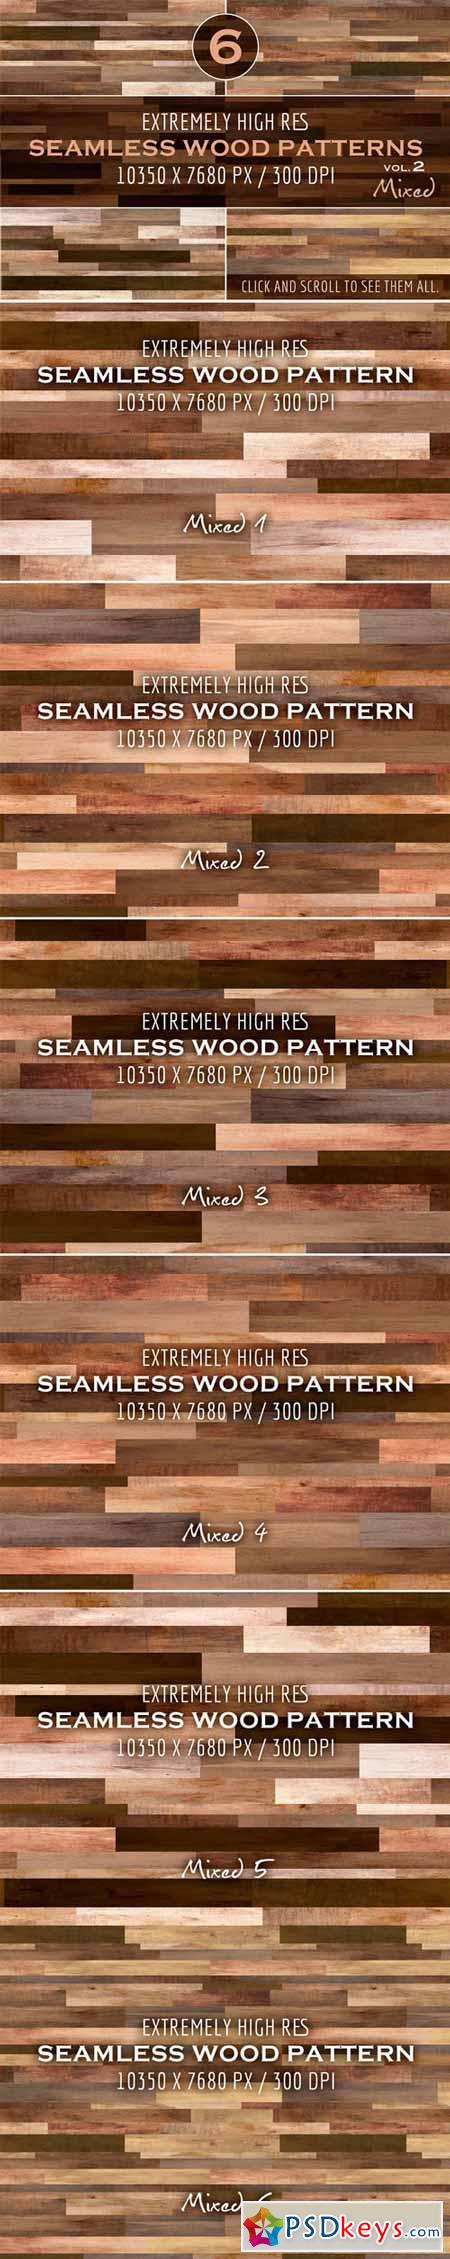 Extremely HR seamless wood patterns 288147